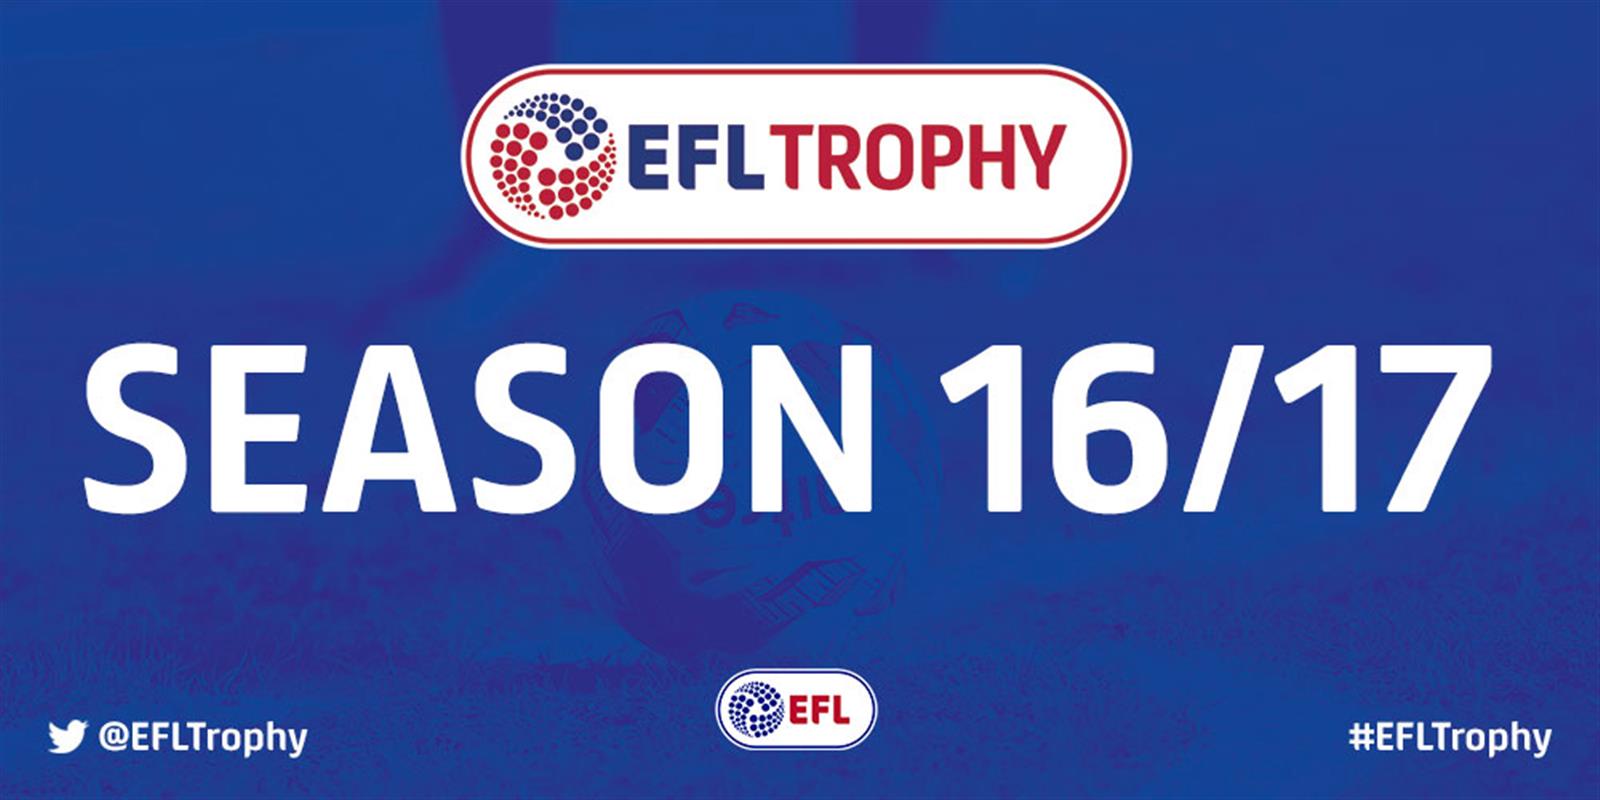 EFL Trophy Games And Dates Confirmed - News - Rochdale AFC